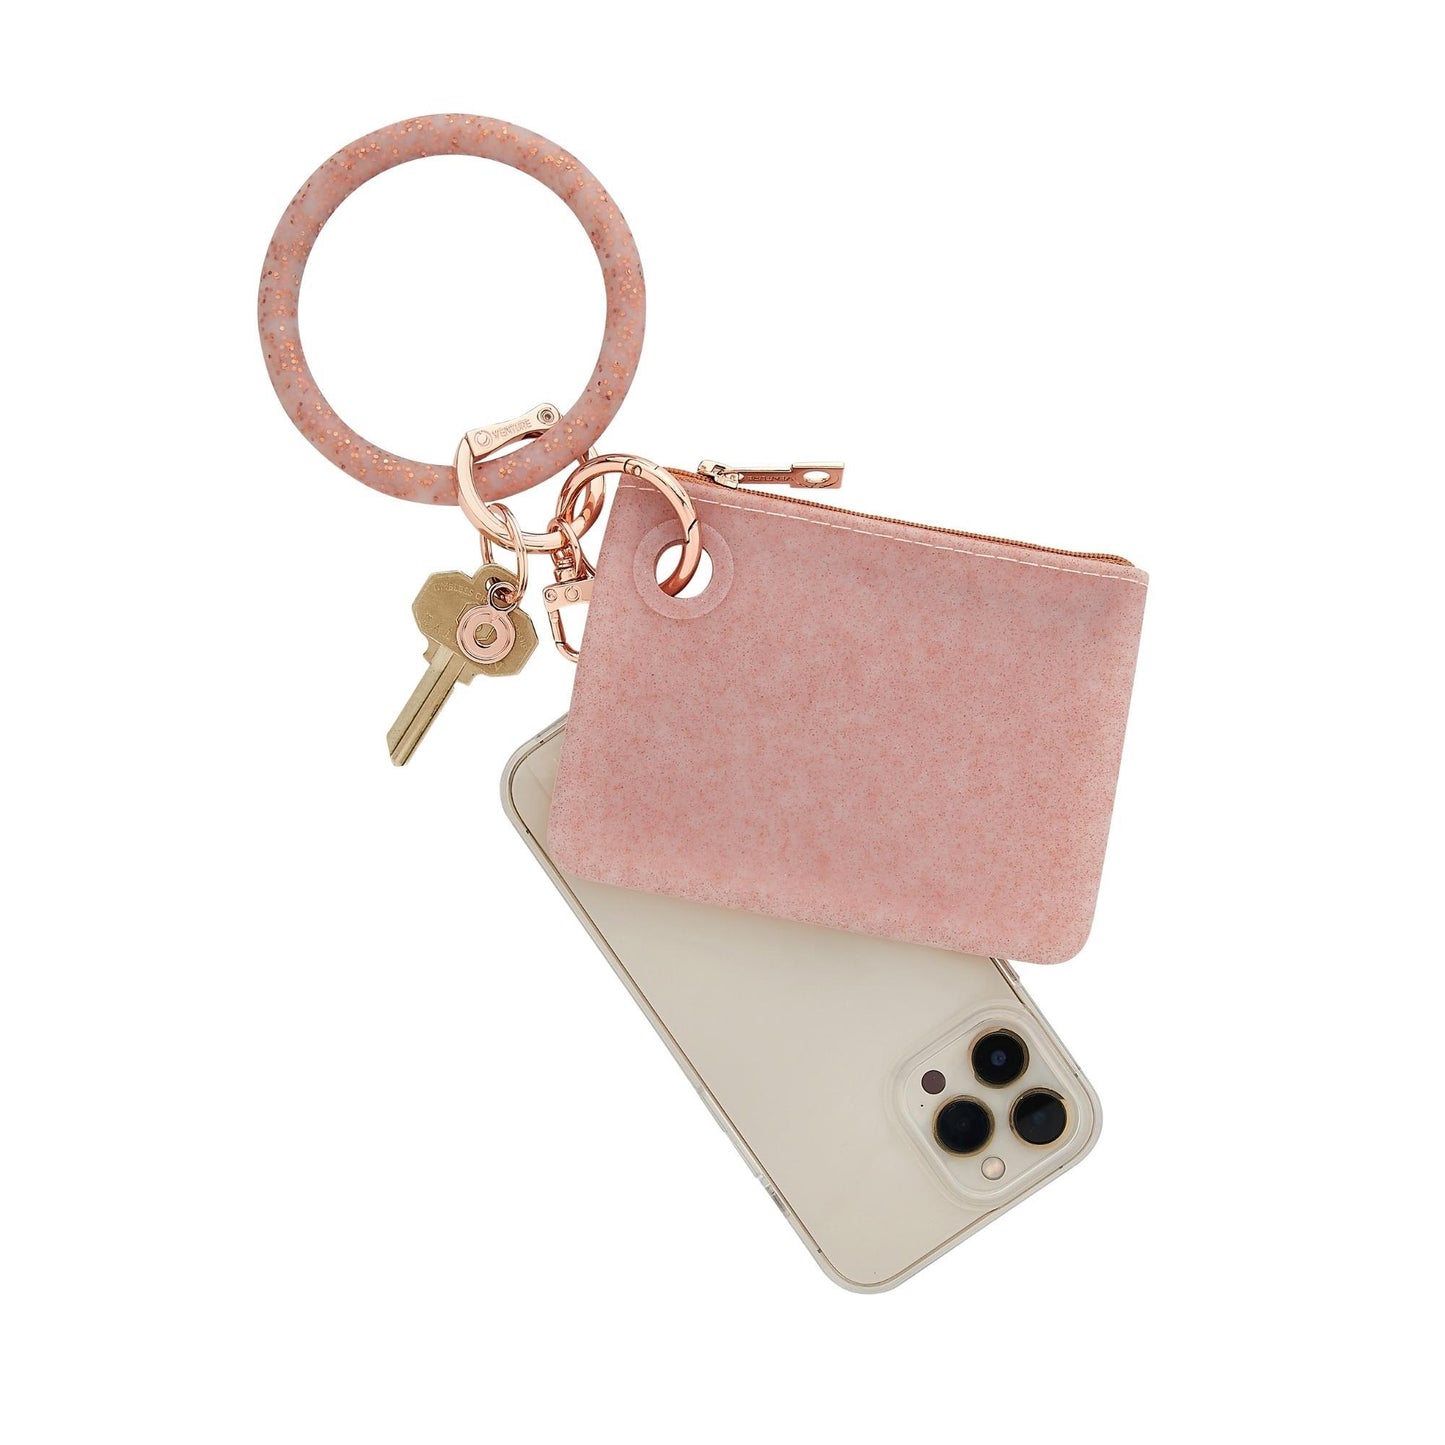 Stylish Mini Pouch Wristlet with Phone Holder in rose gold.